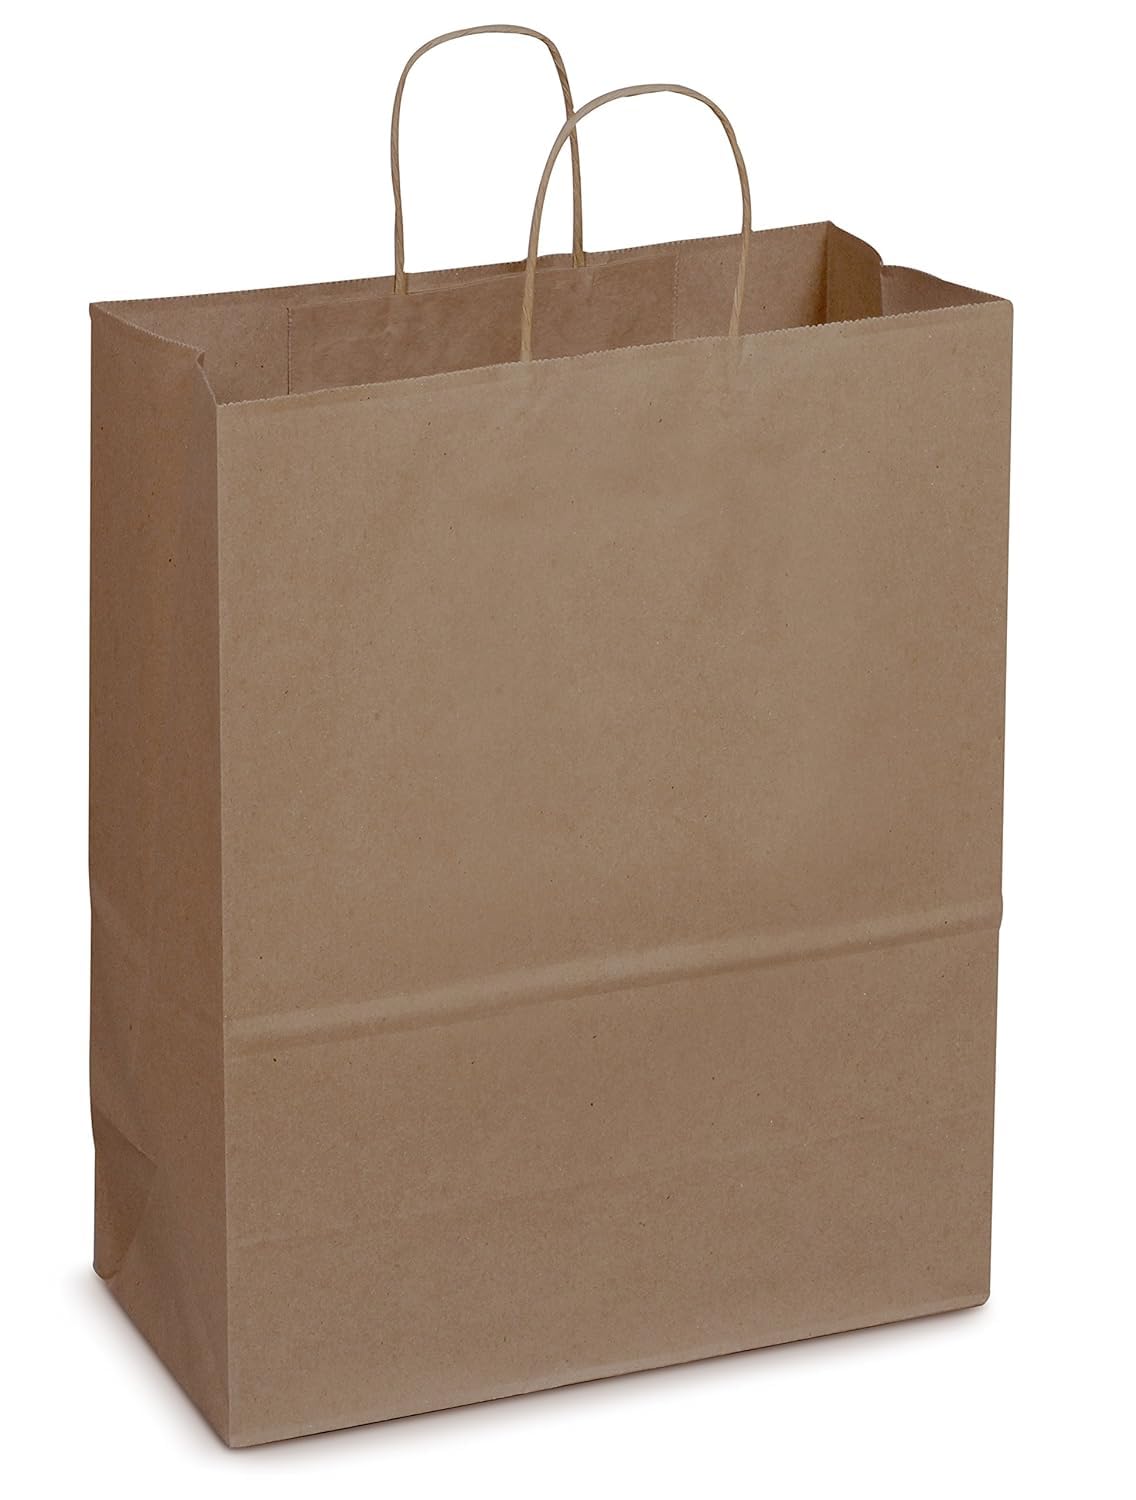 These popular 8in x 4.5in x 10.25in Dubl Life® 60#  Kraft Tempo Paper Bags with gusseted flat bottom and paper twist handles are BPI® and FSC® certified. Sold 250 per bundle. Free shipping available. 